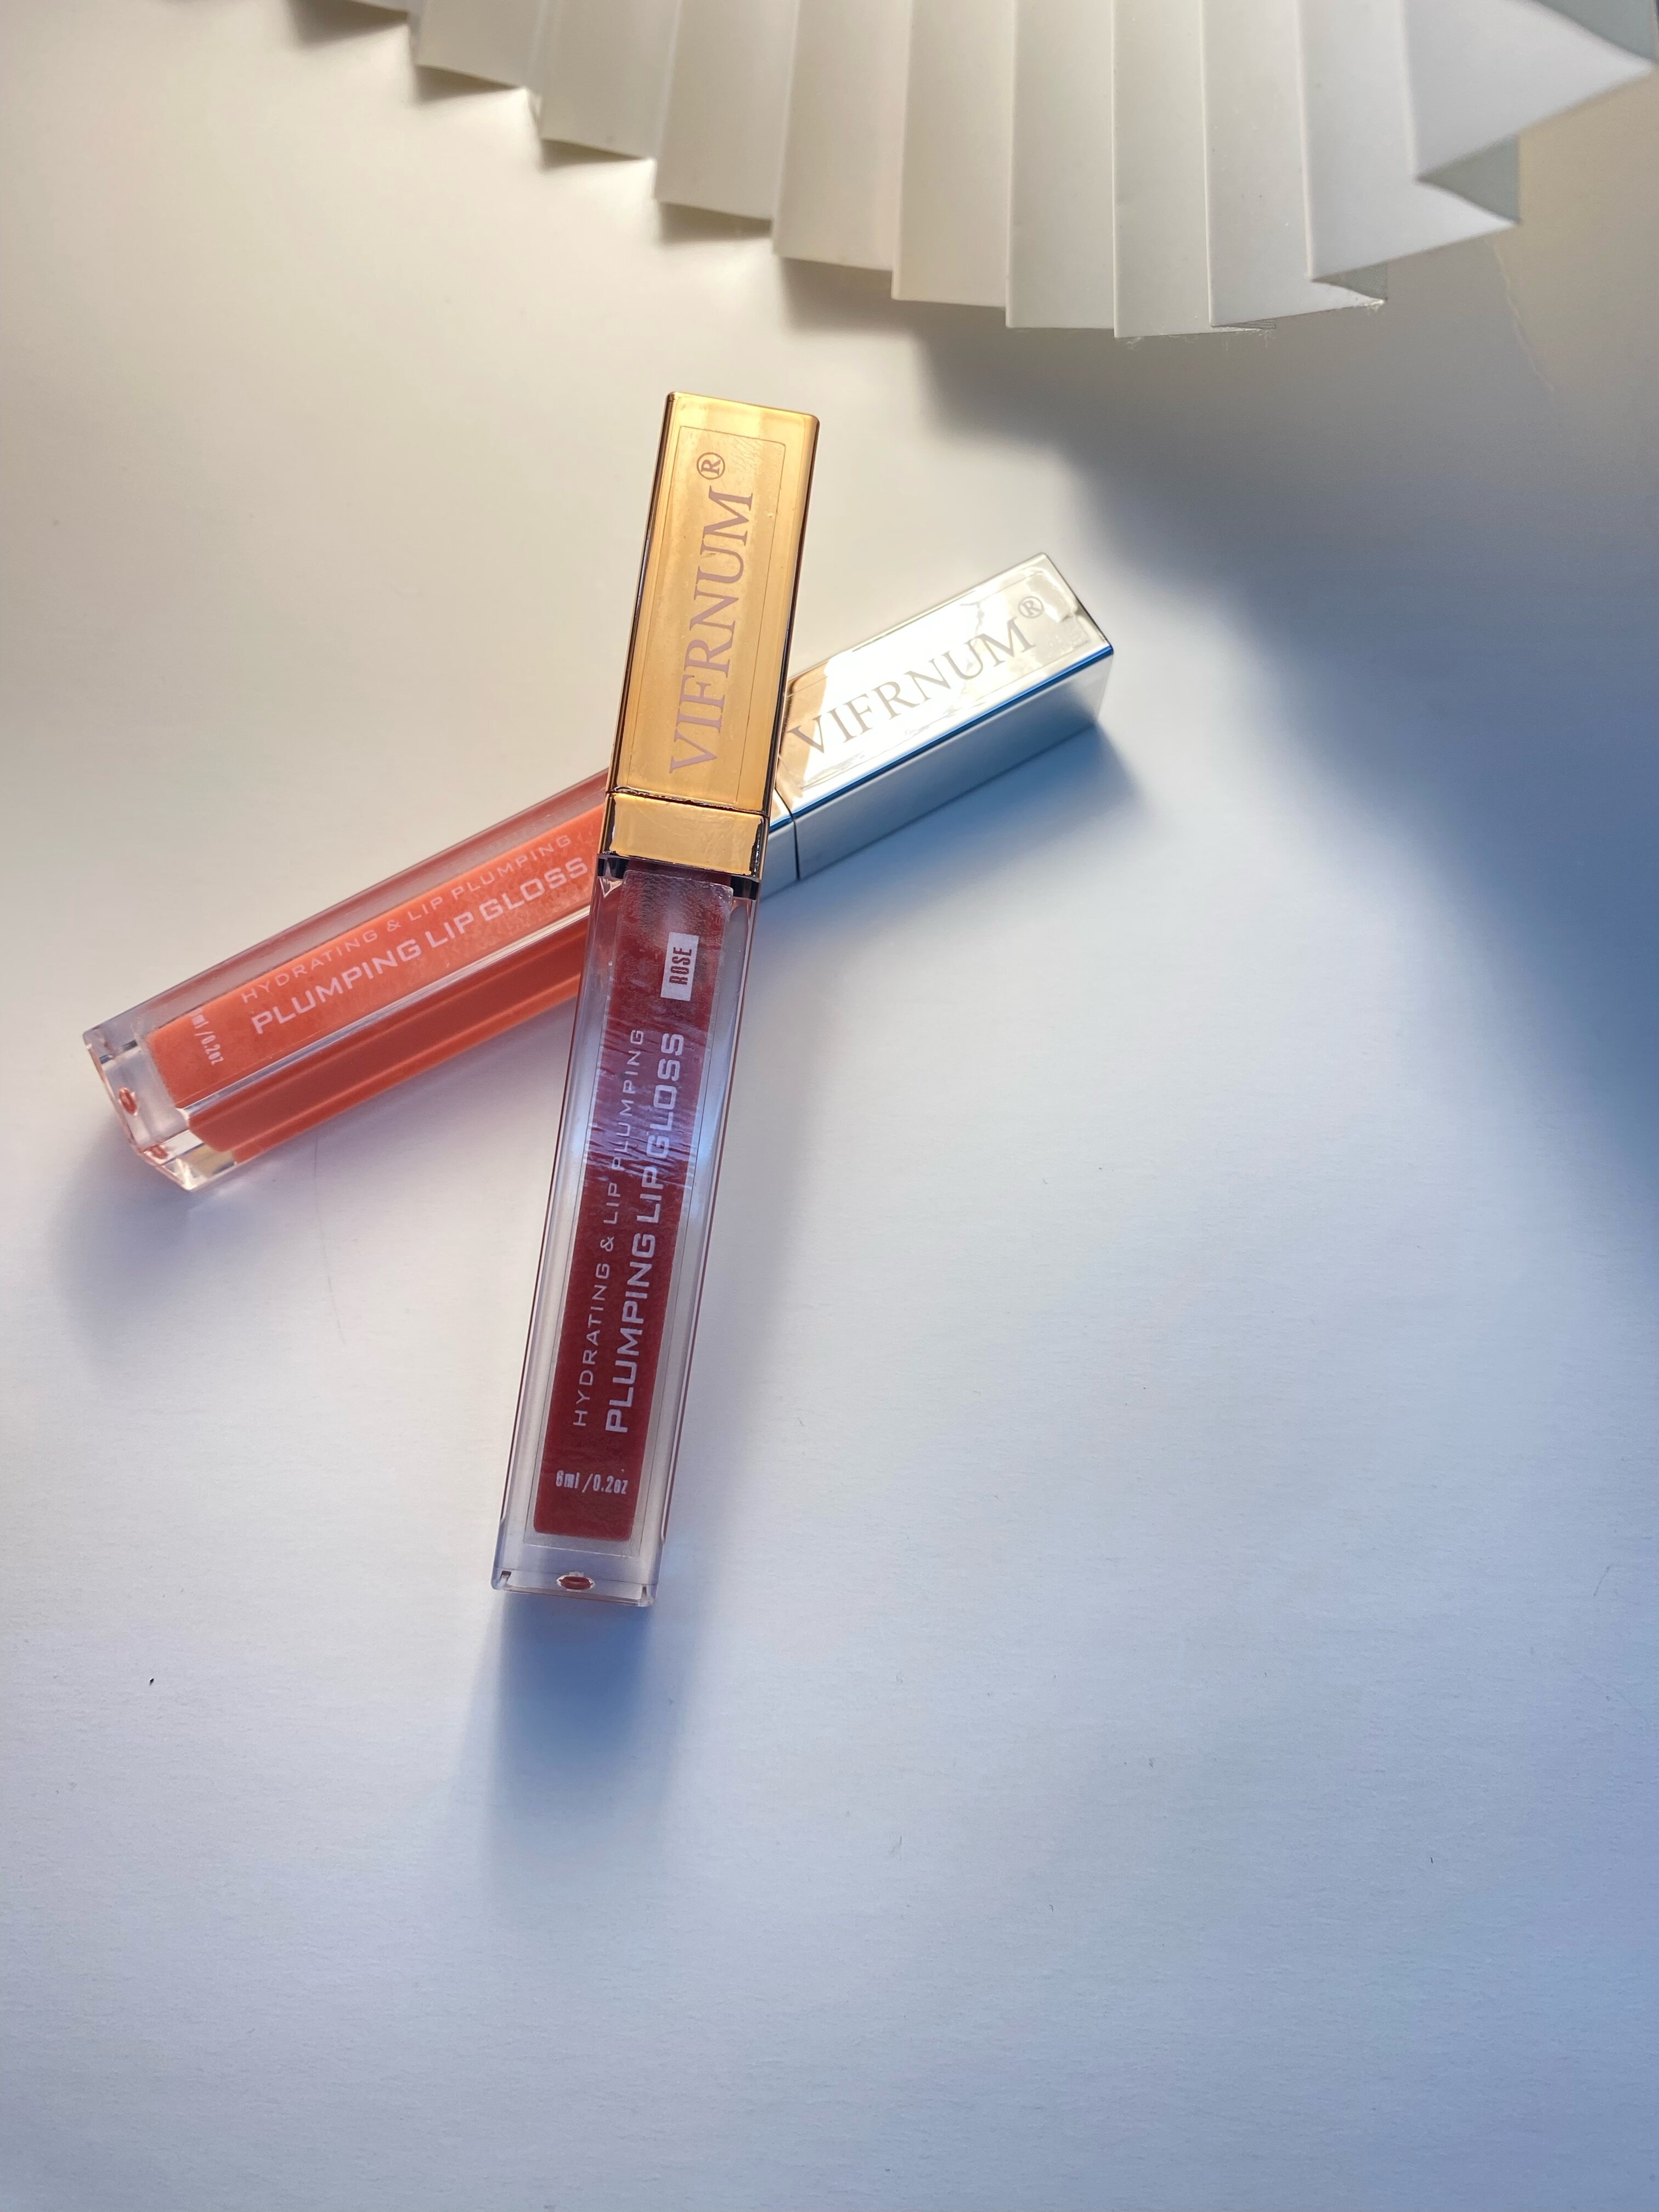 VIFRNUM 10ML Lipglosses Reflective Brilliance for a Mirror-Like Shine Gloss Glamour Gorgeous